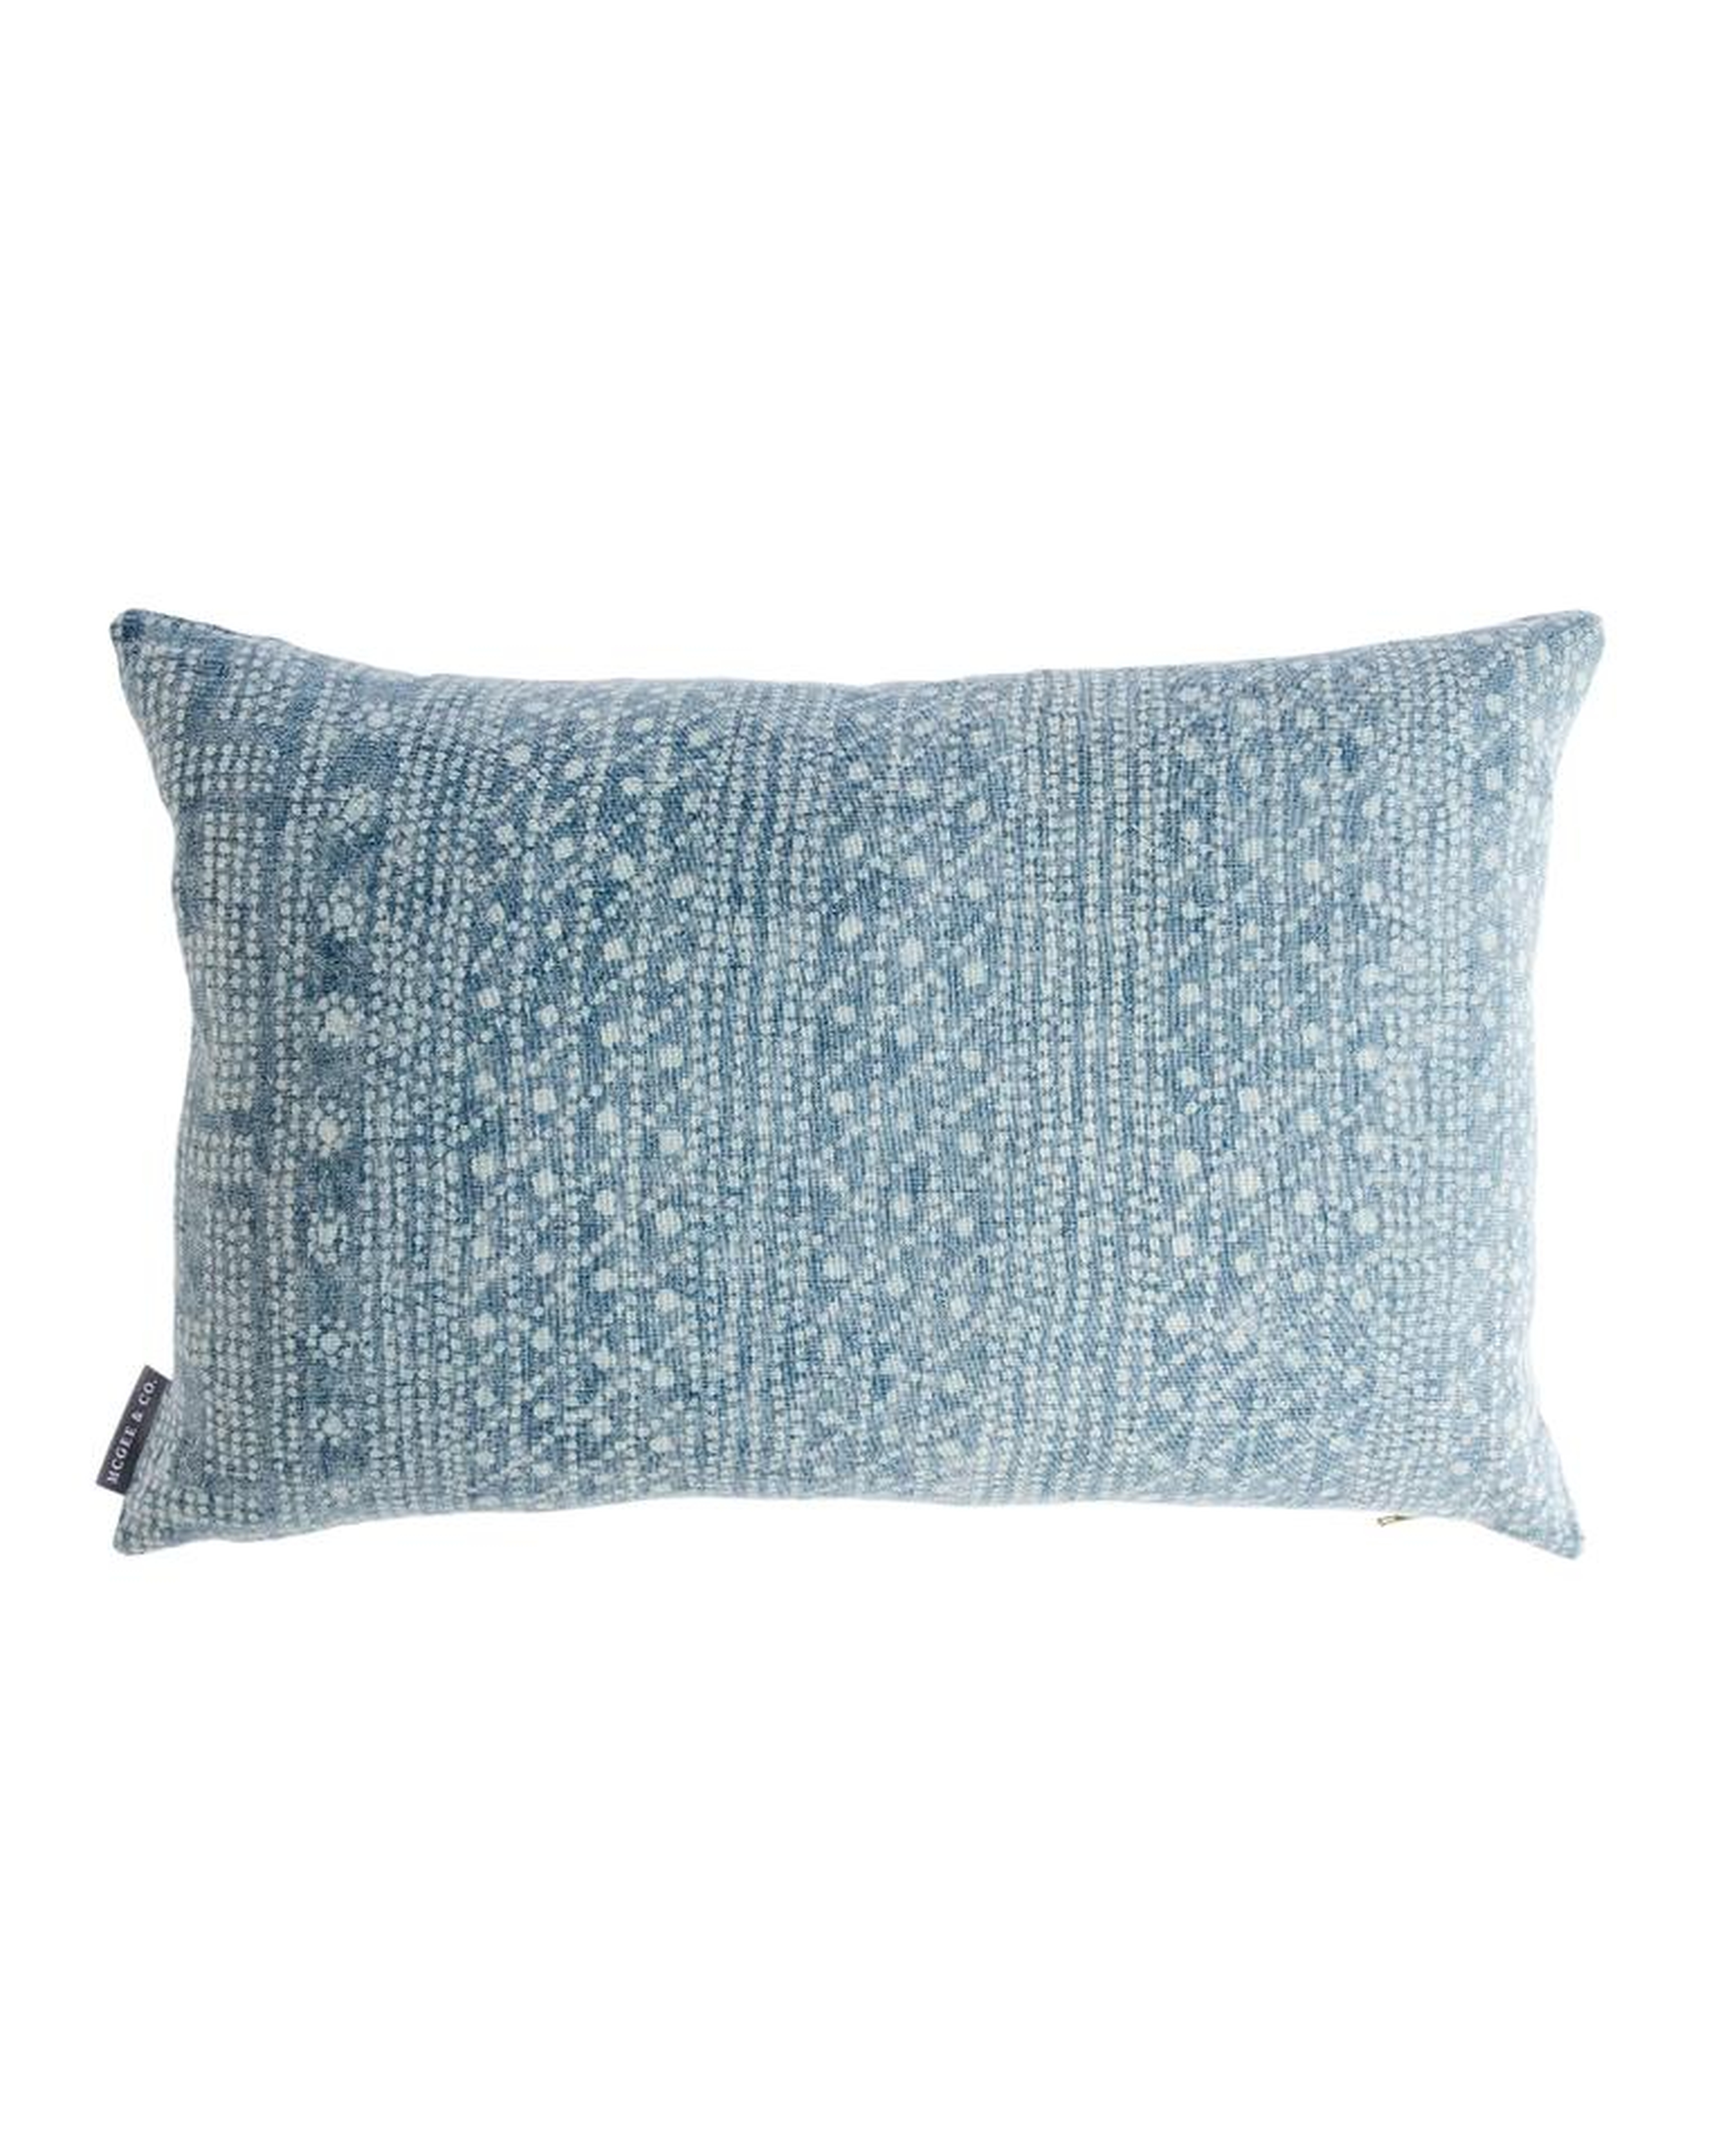 JUNIE PILLOW WITHOUT INSERT, 14" x 20" - McGee & Co.